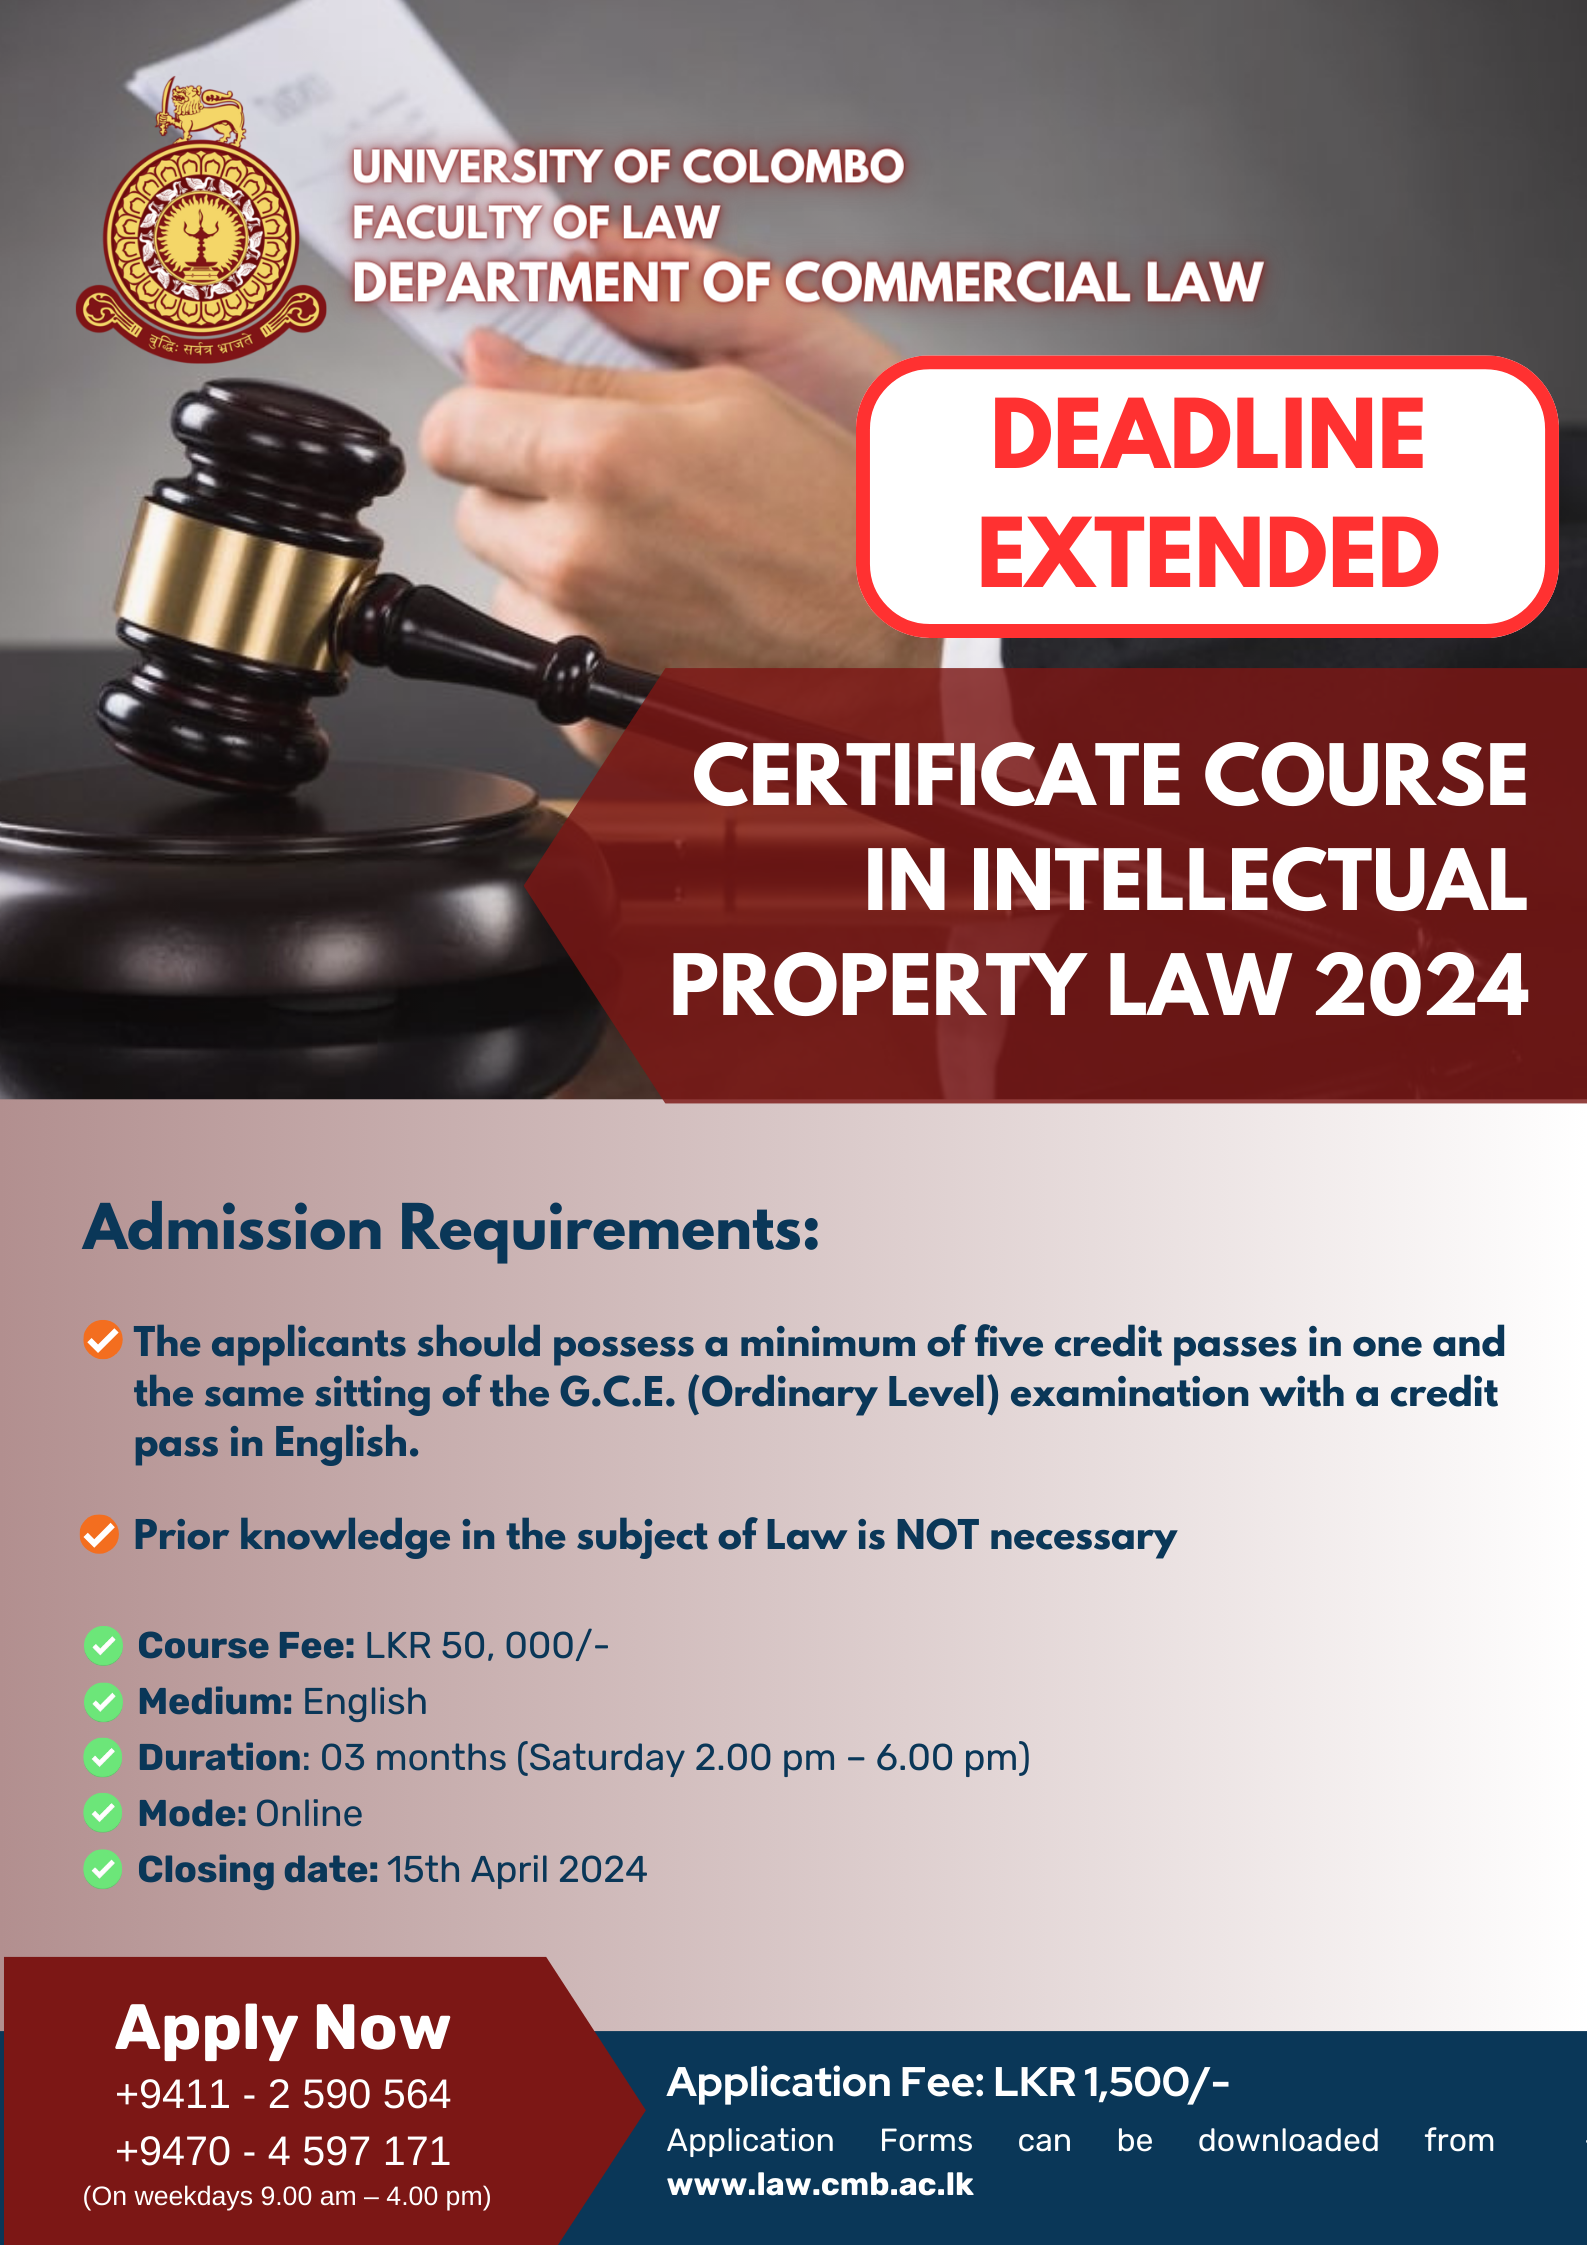 CERTIFICATE COURSE IN INTELLECTUAL PROPERTY LAW – 2024